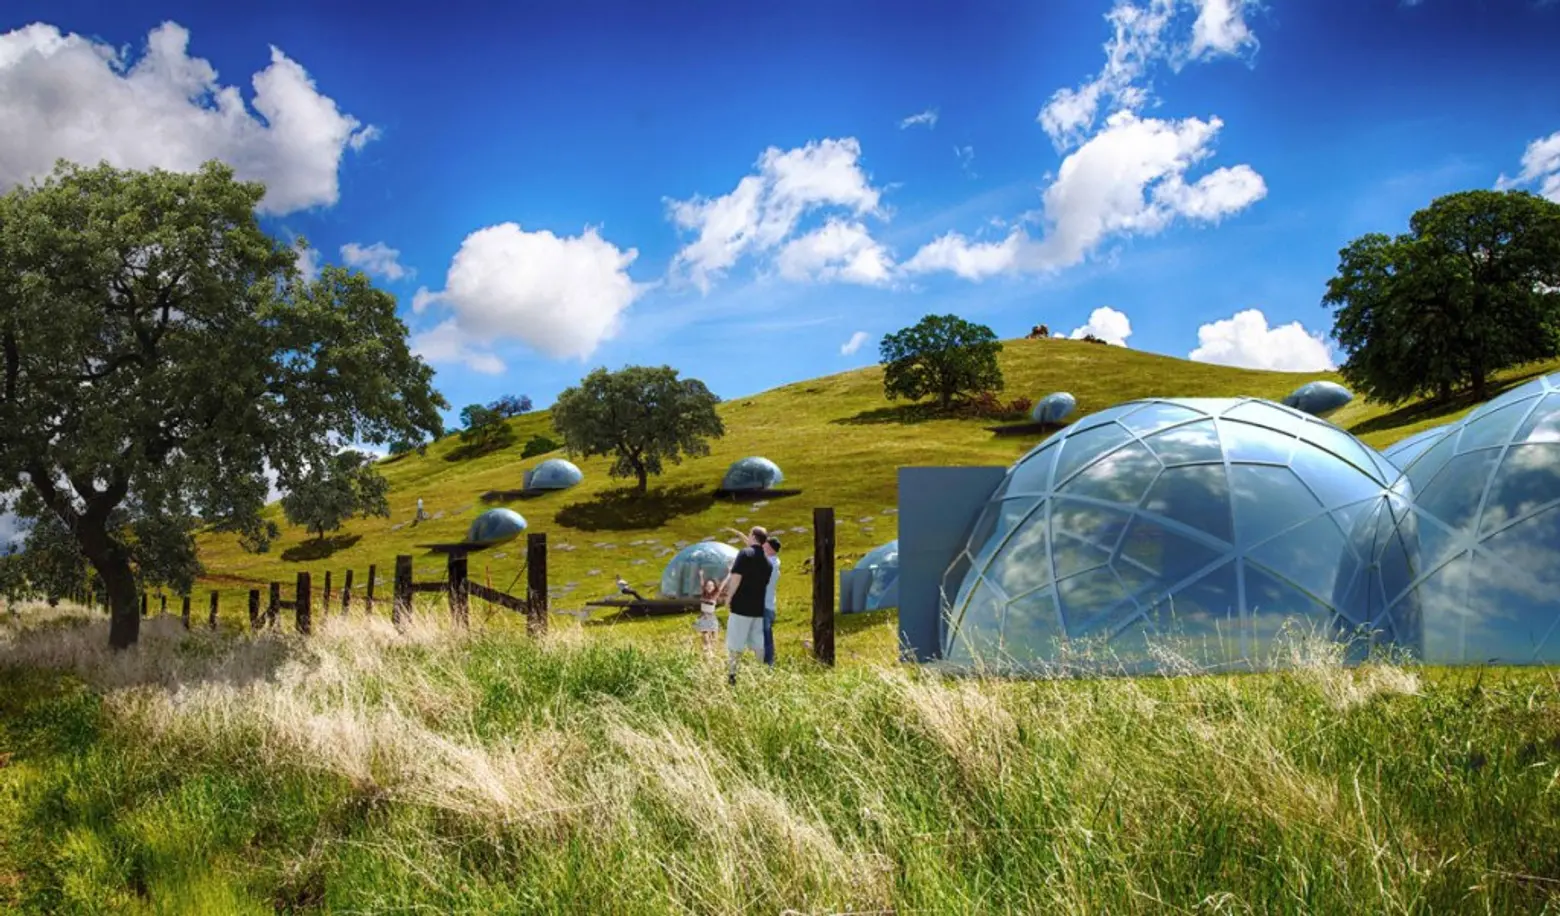 smartdome construction, geodesic domes, diy 